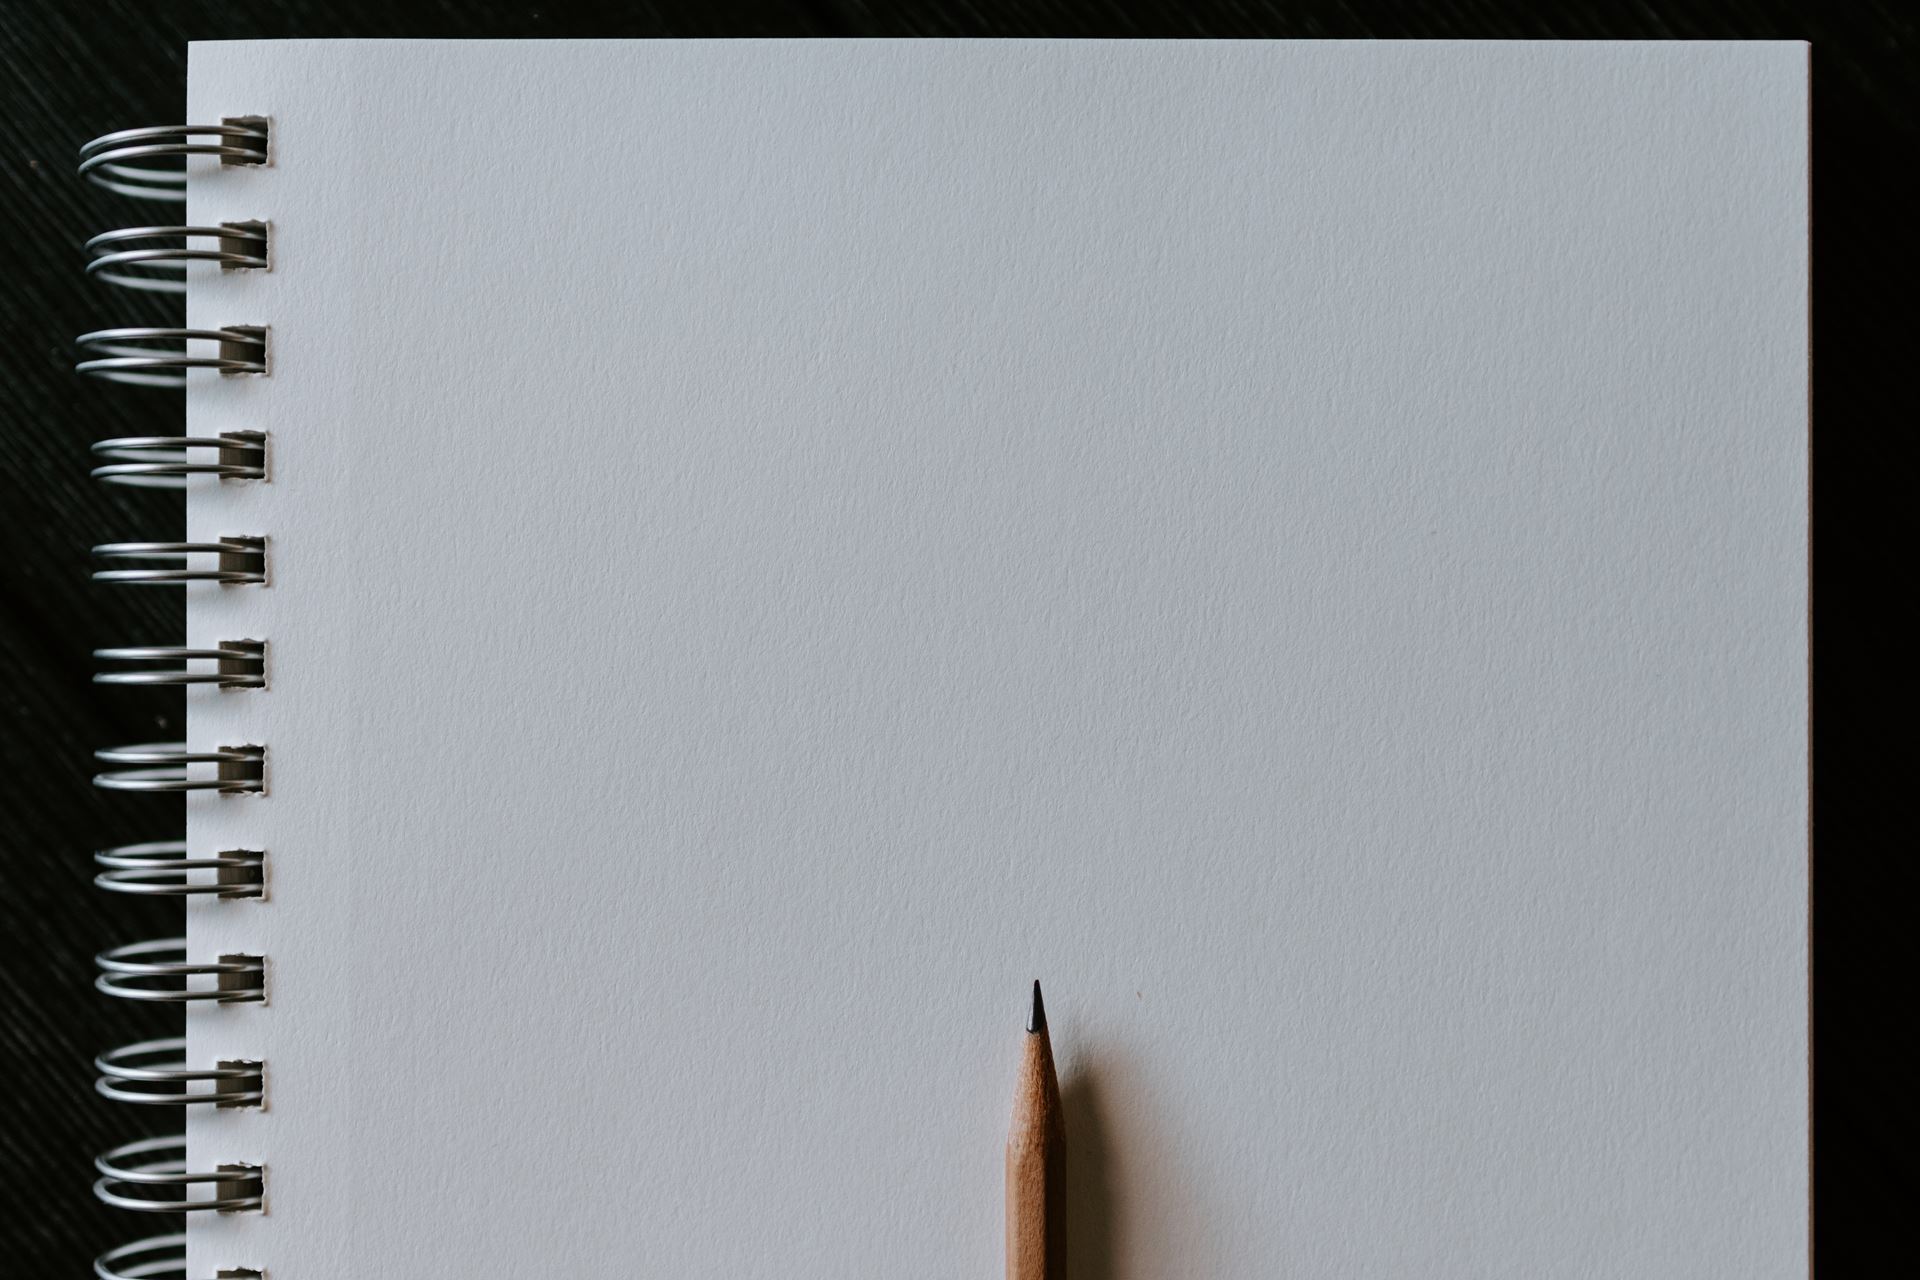 Blank piece of paper with sharpened pencil at the bottom